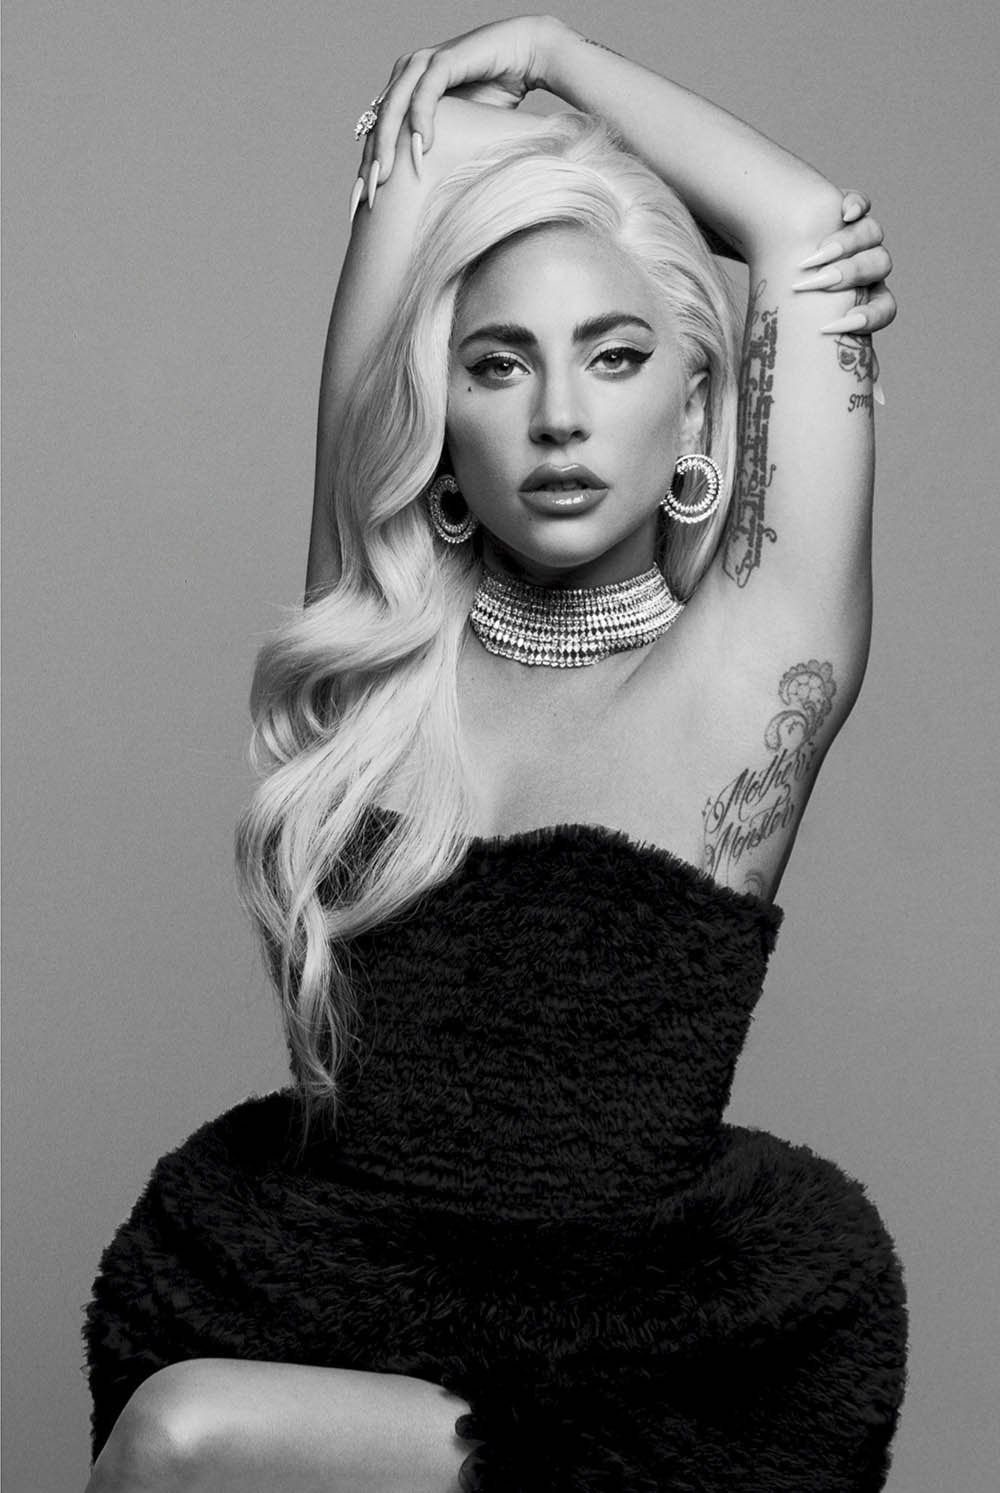 Lady Gaga covers Allure US October 2019 by Daniel Jackson